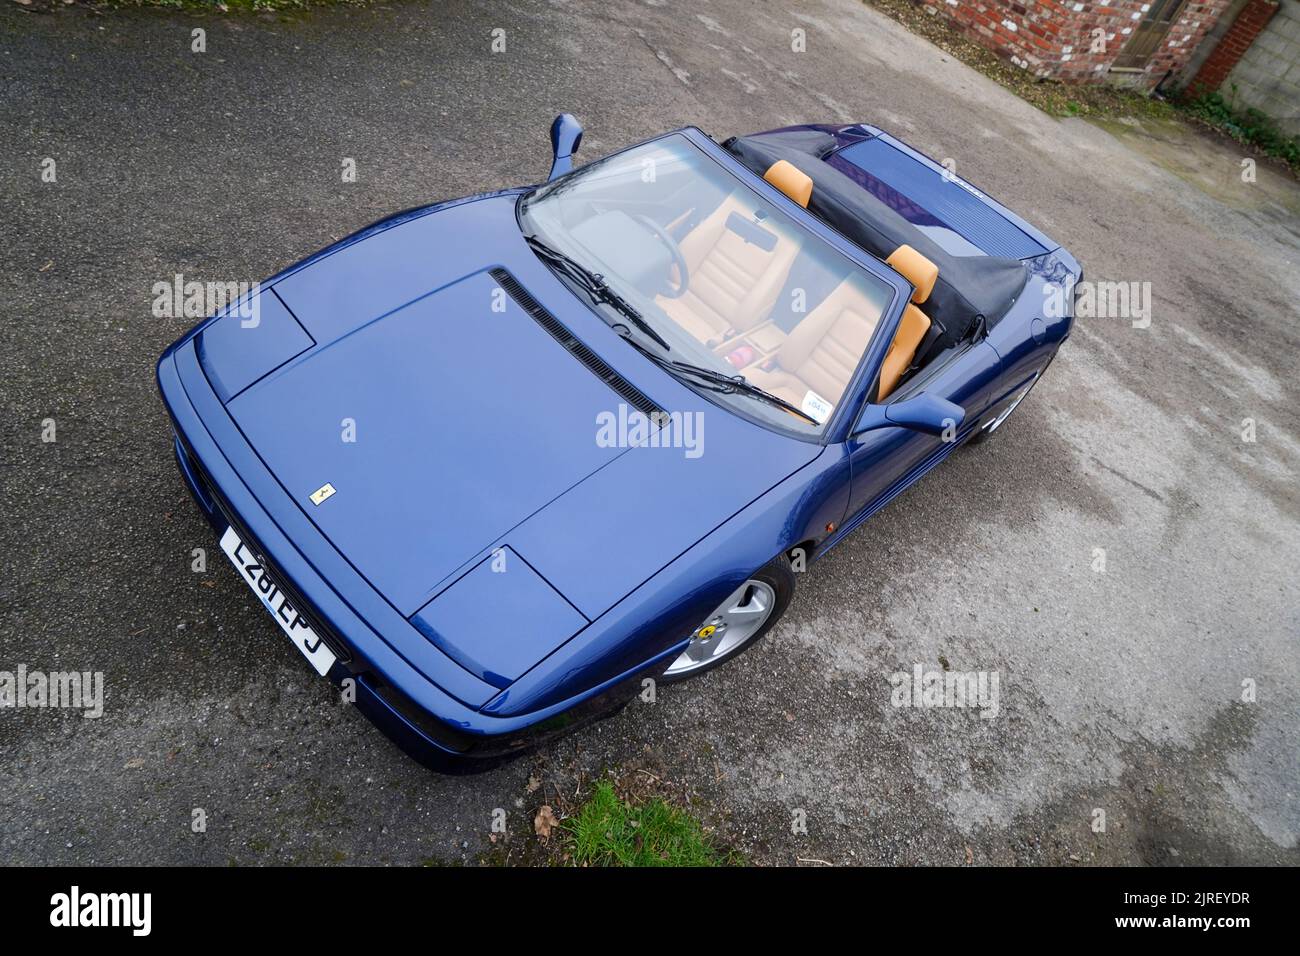 Blue Ferrari F355 convertible with its roof down parked on tarmac, shot from above Stock Photo